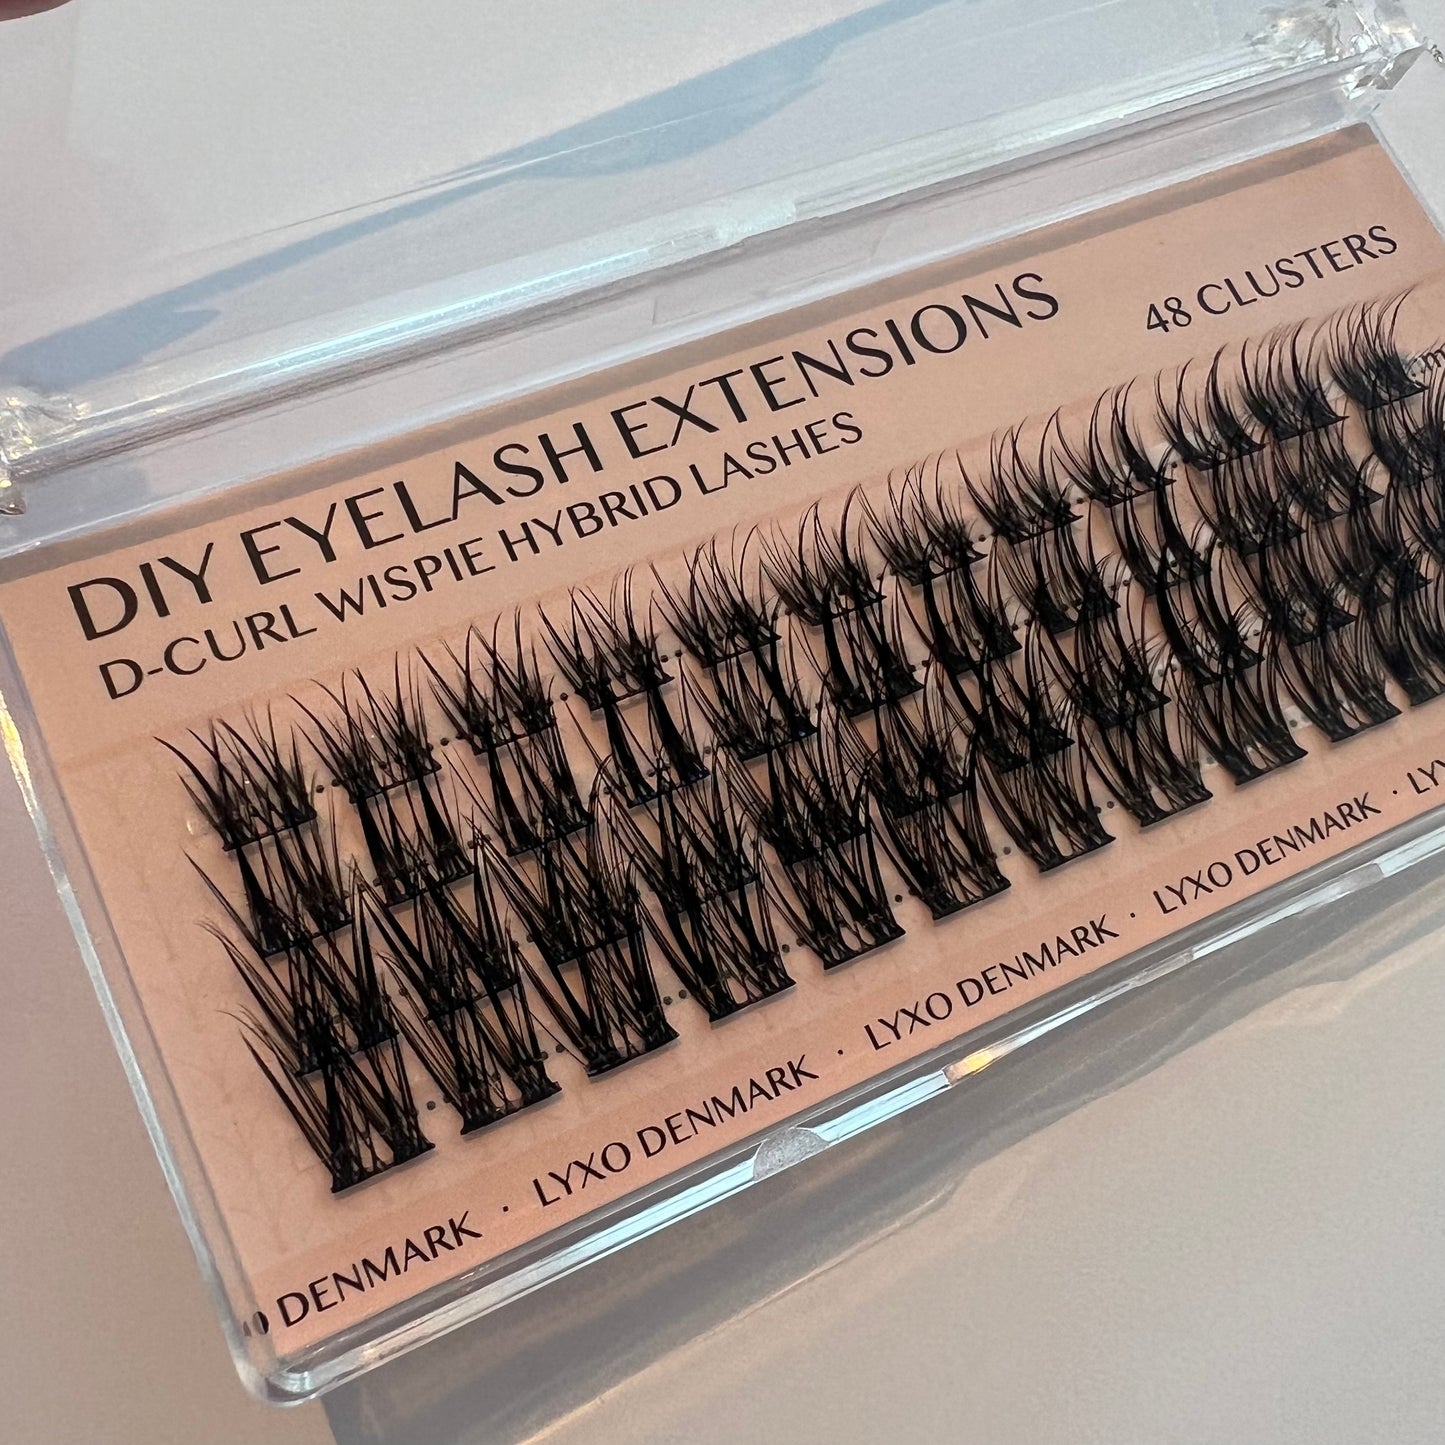 Wispie Hybrid D-curl Clusters/Lashes